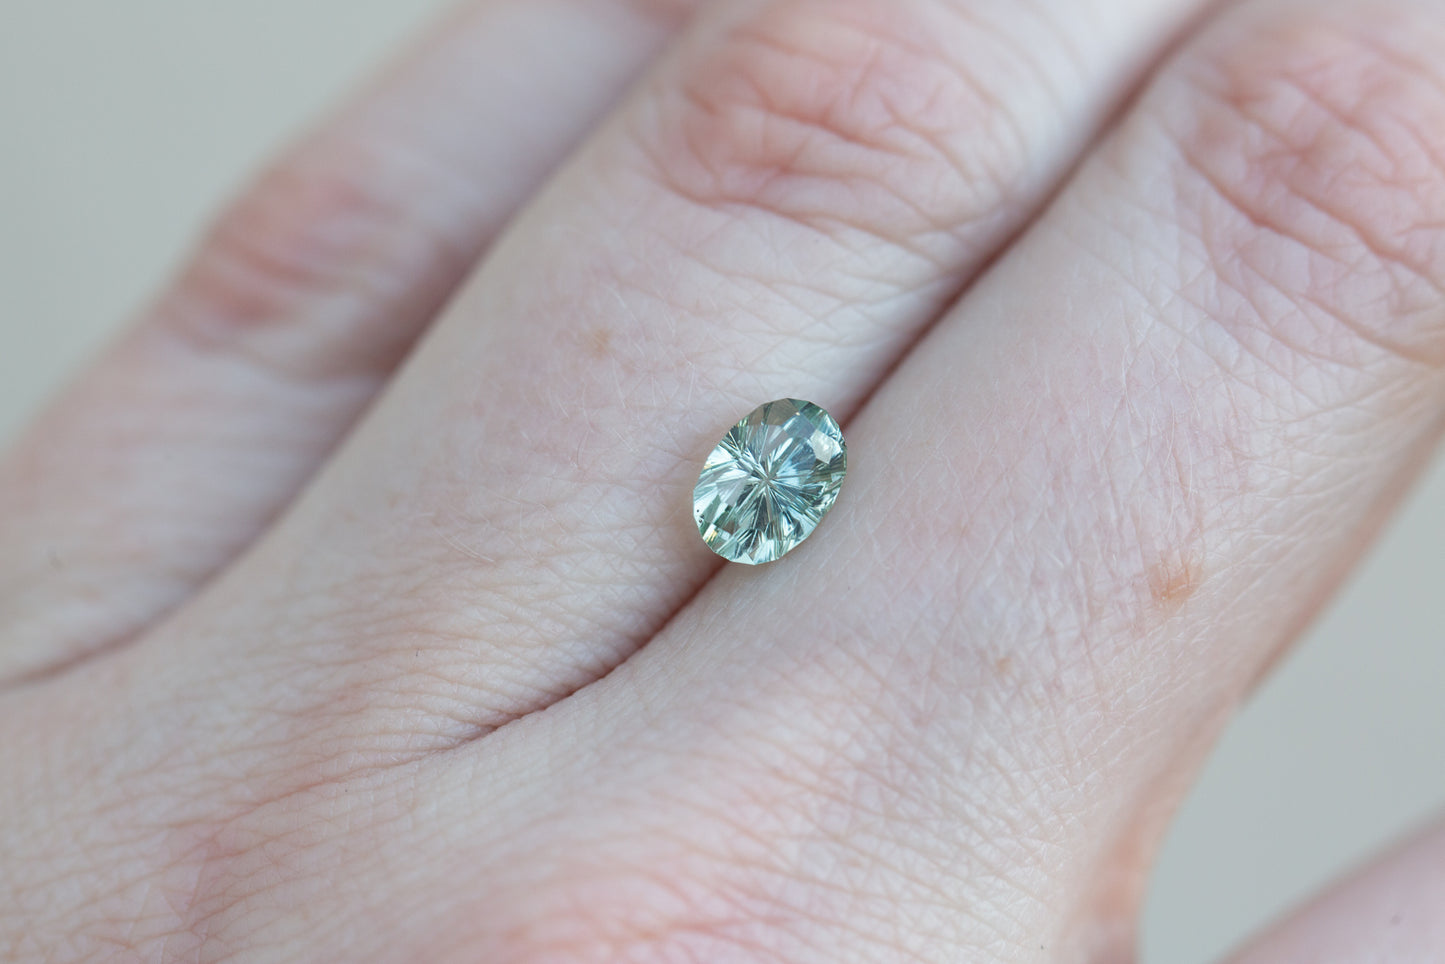 Load image into Gallery viewer, 1.41ct oval seafoam mint green sapphire- Starbrite cut by John Dyer
